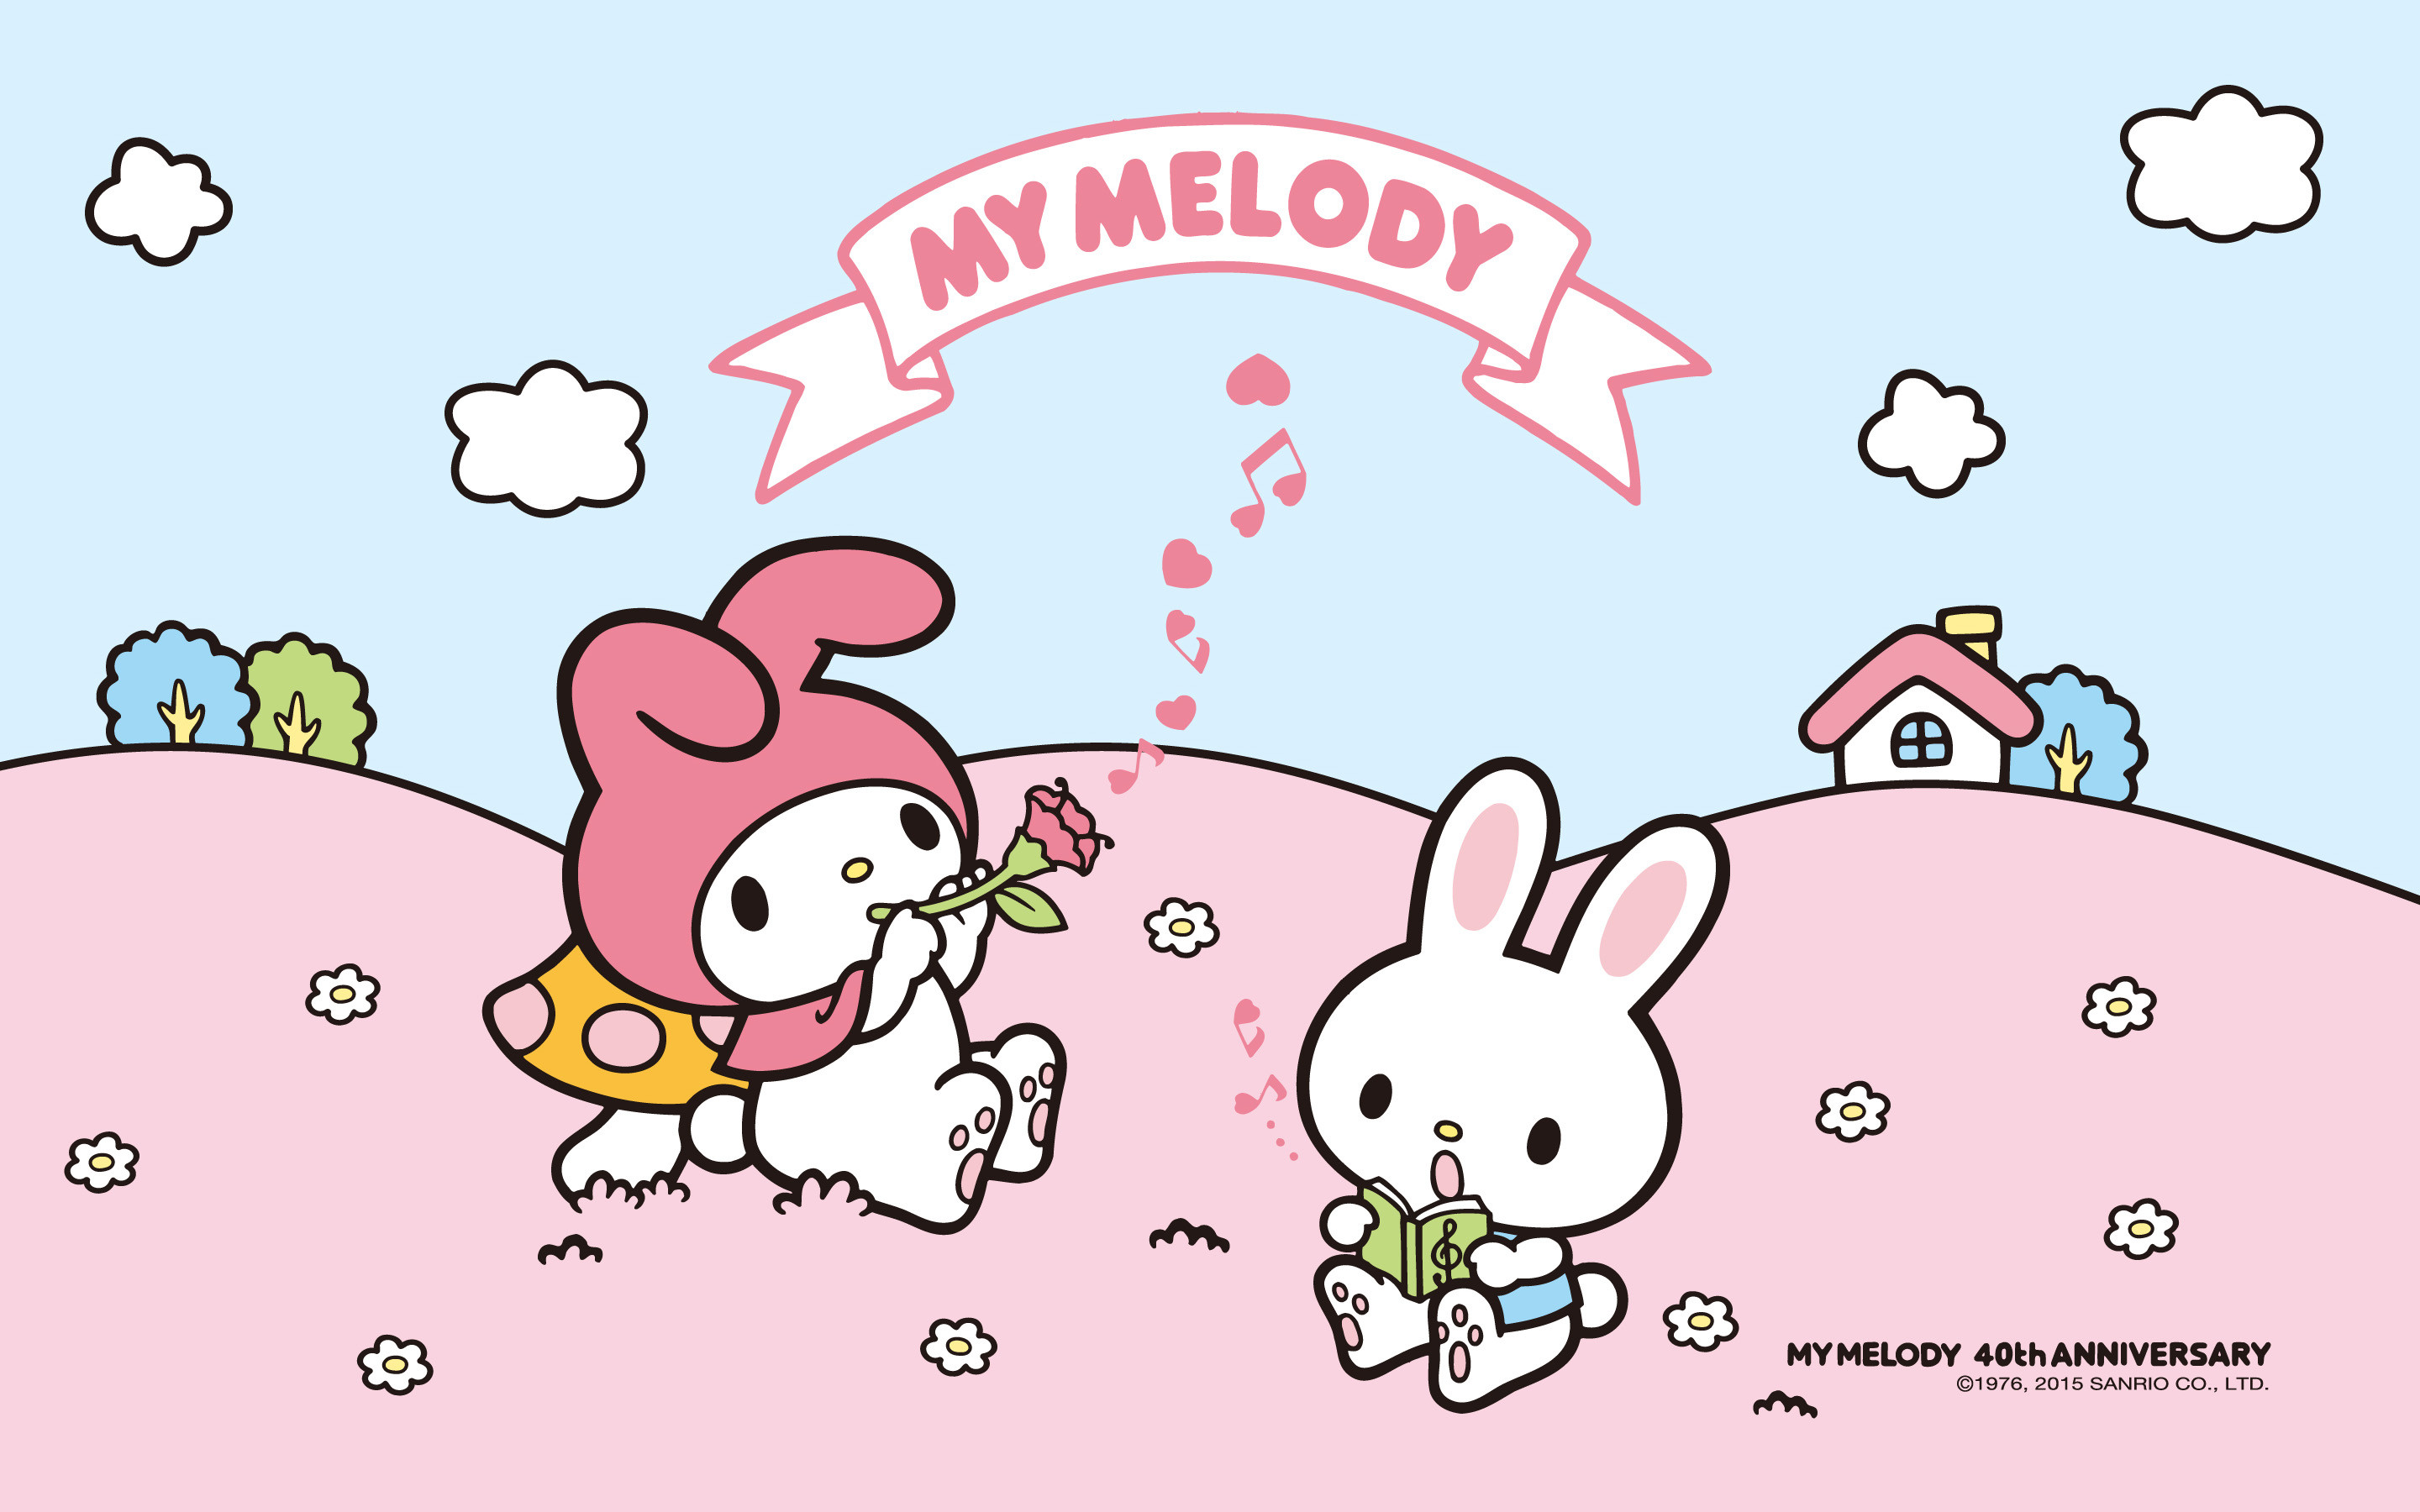 My Melody Pink Blue Music Background – A super cute desktop background from Sanrio – My Melody Pink Blue Music Background Click the image to view the